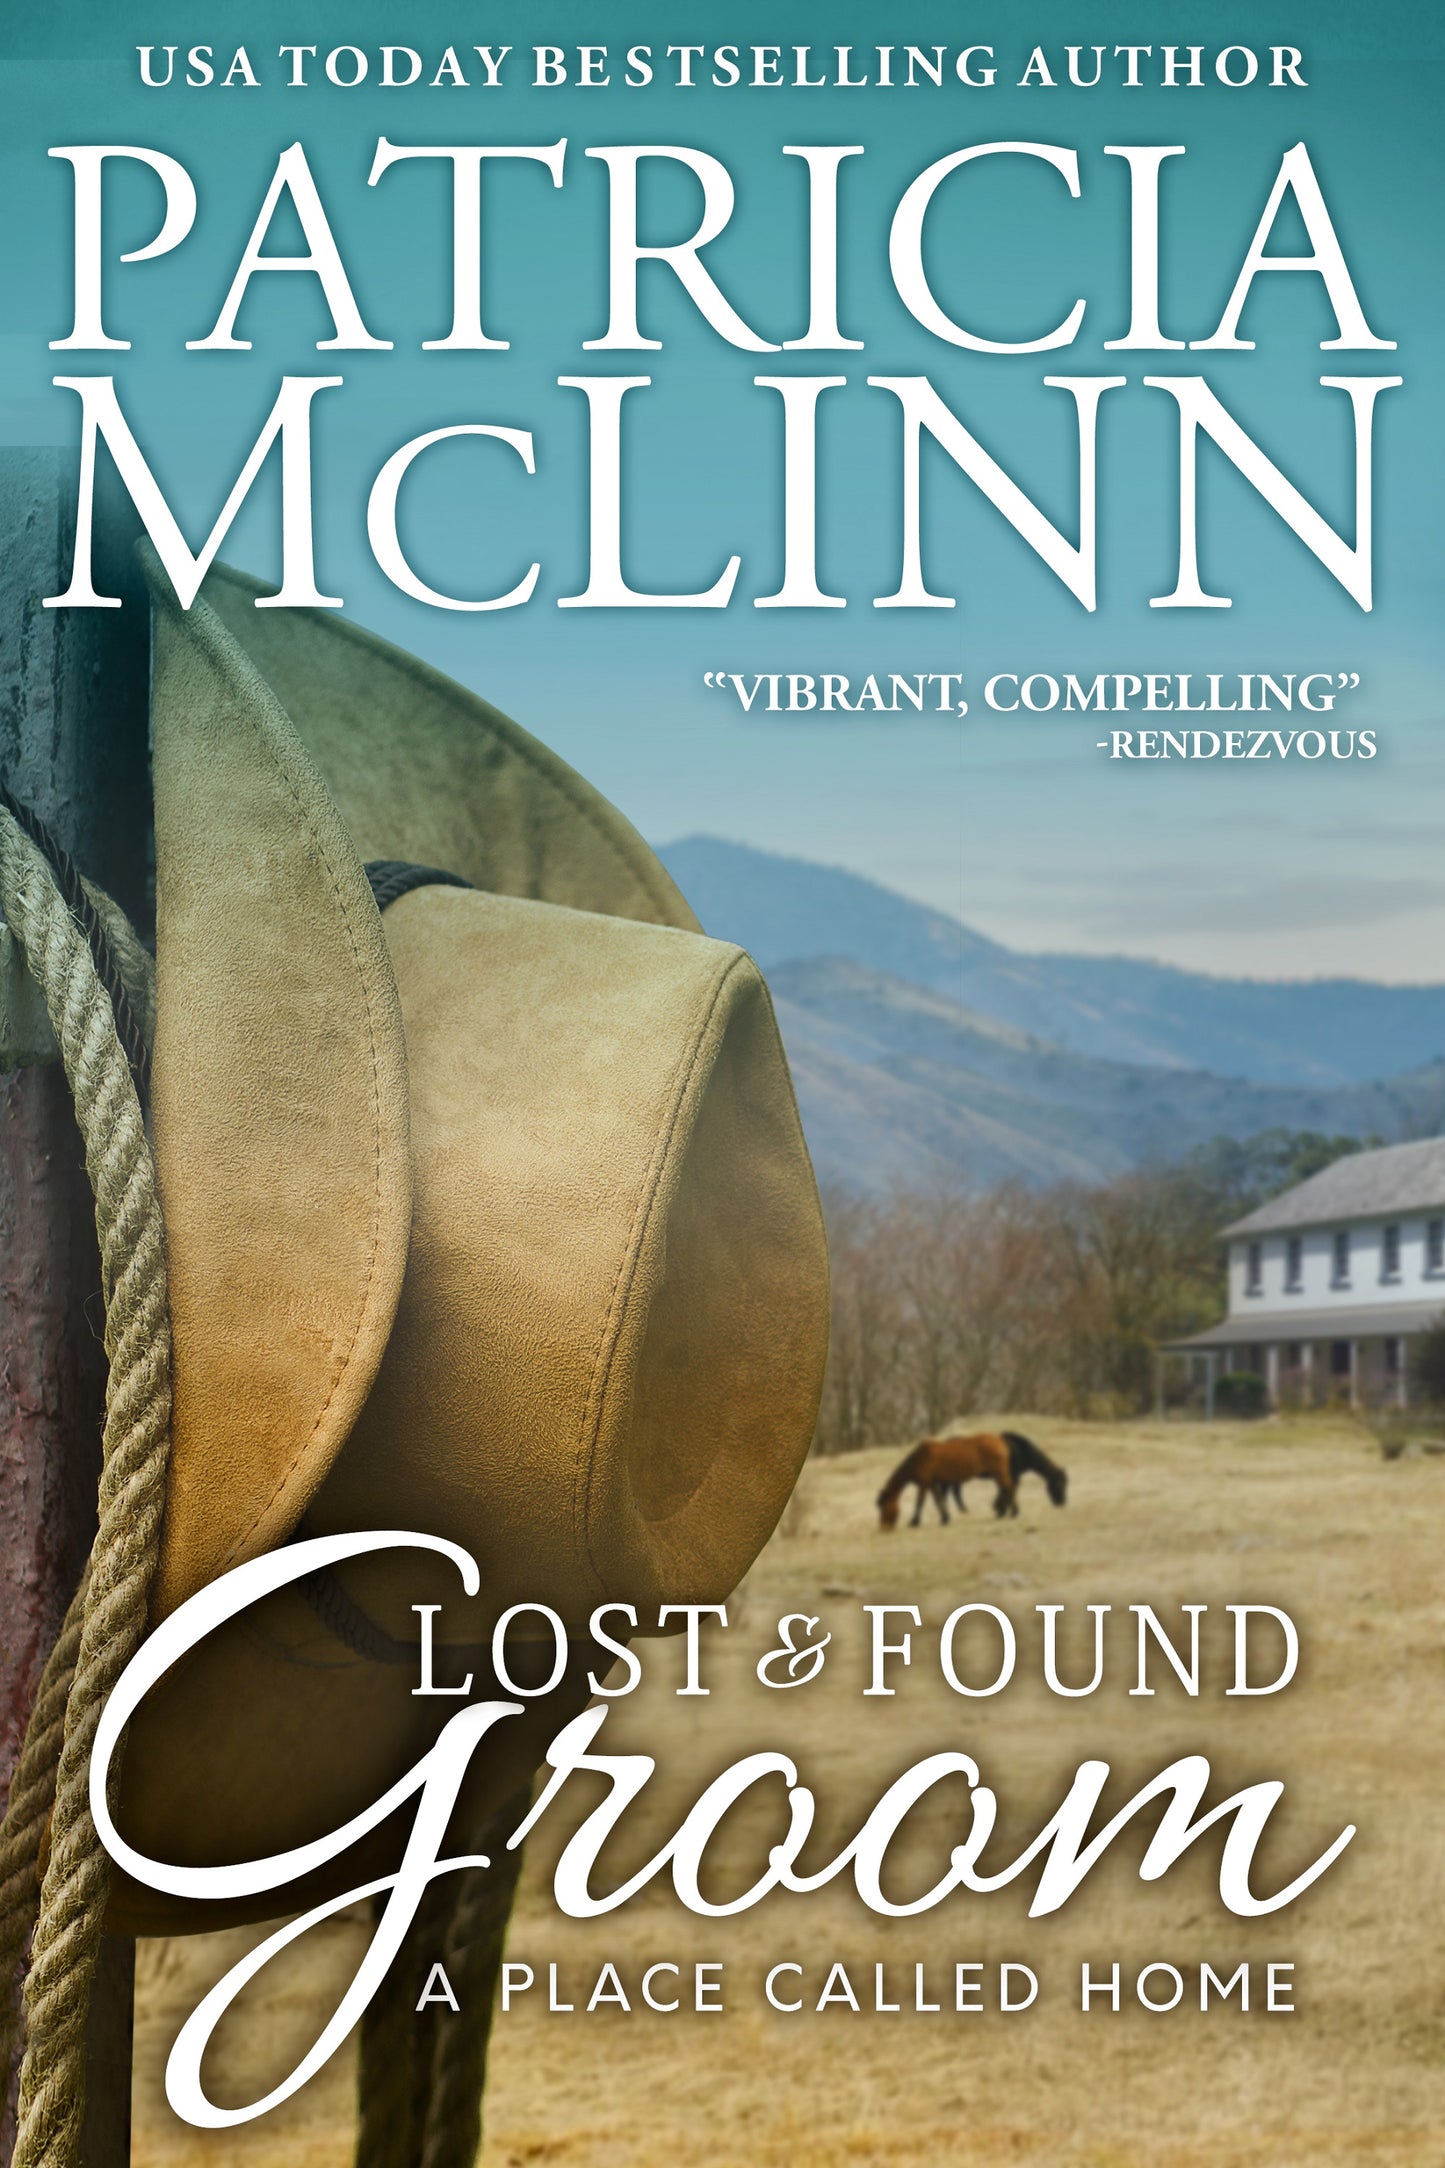 Lost and Found Groom - Patricia McLinn